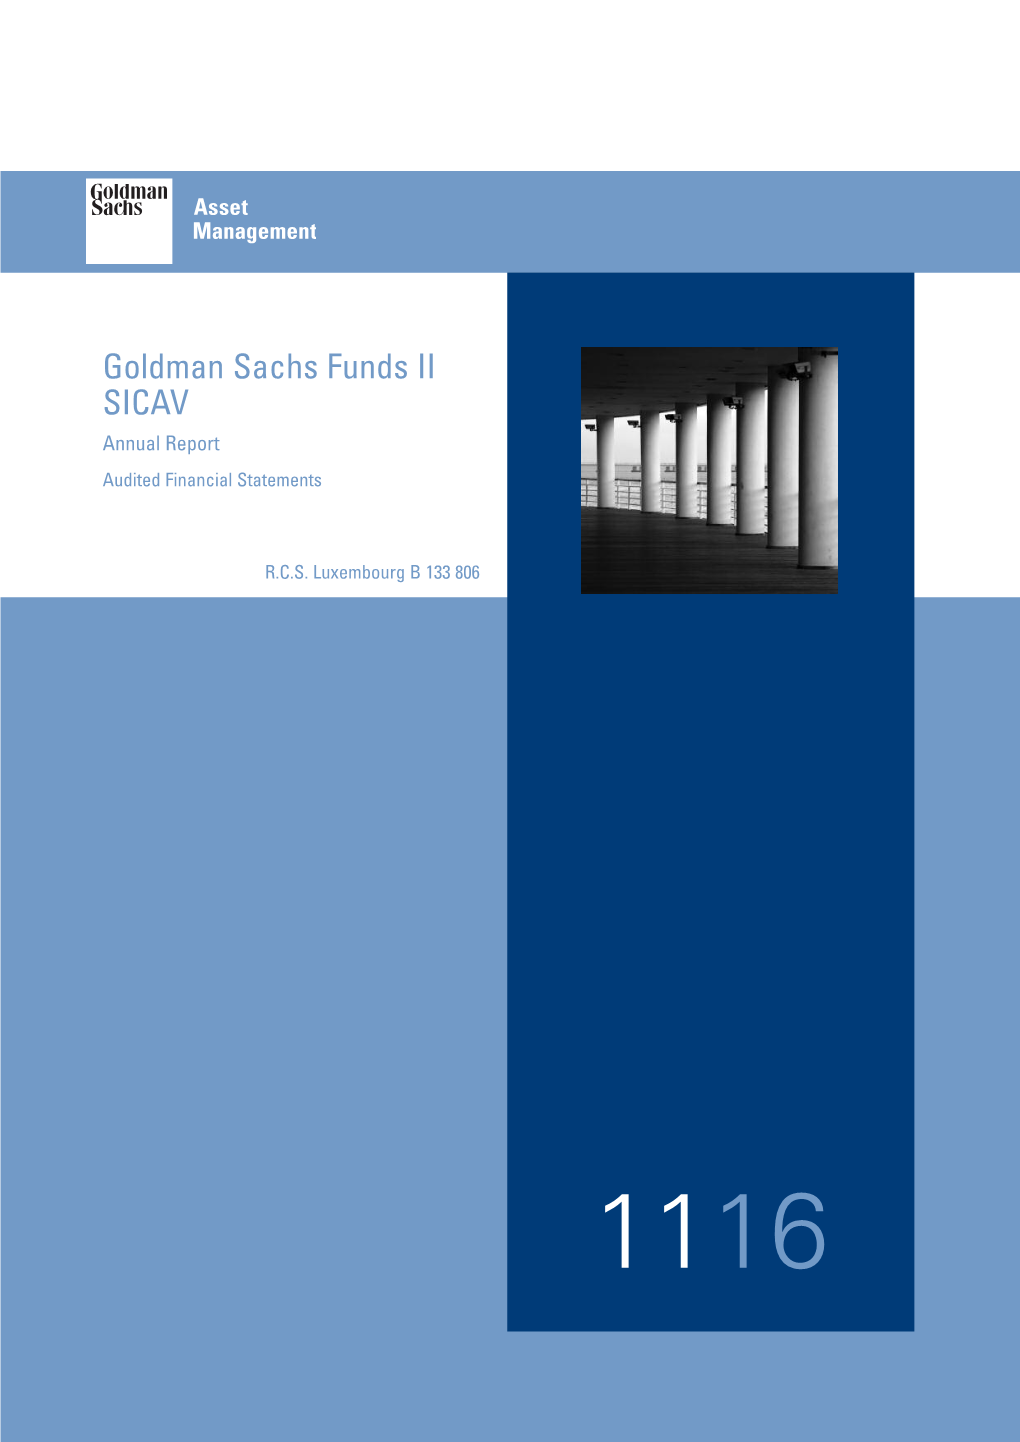 Goldman Sachs Funds II SICAV Annual Report Audited Financial Statements